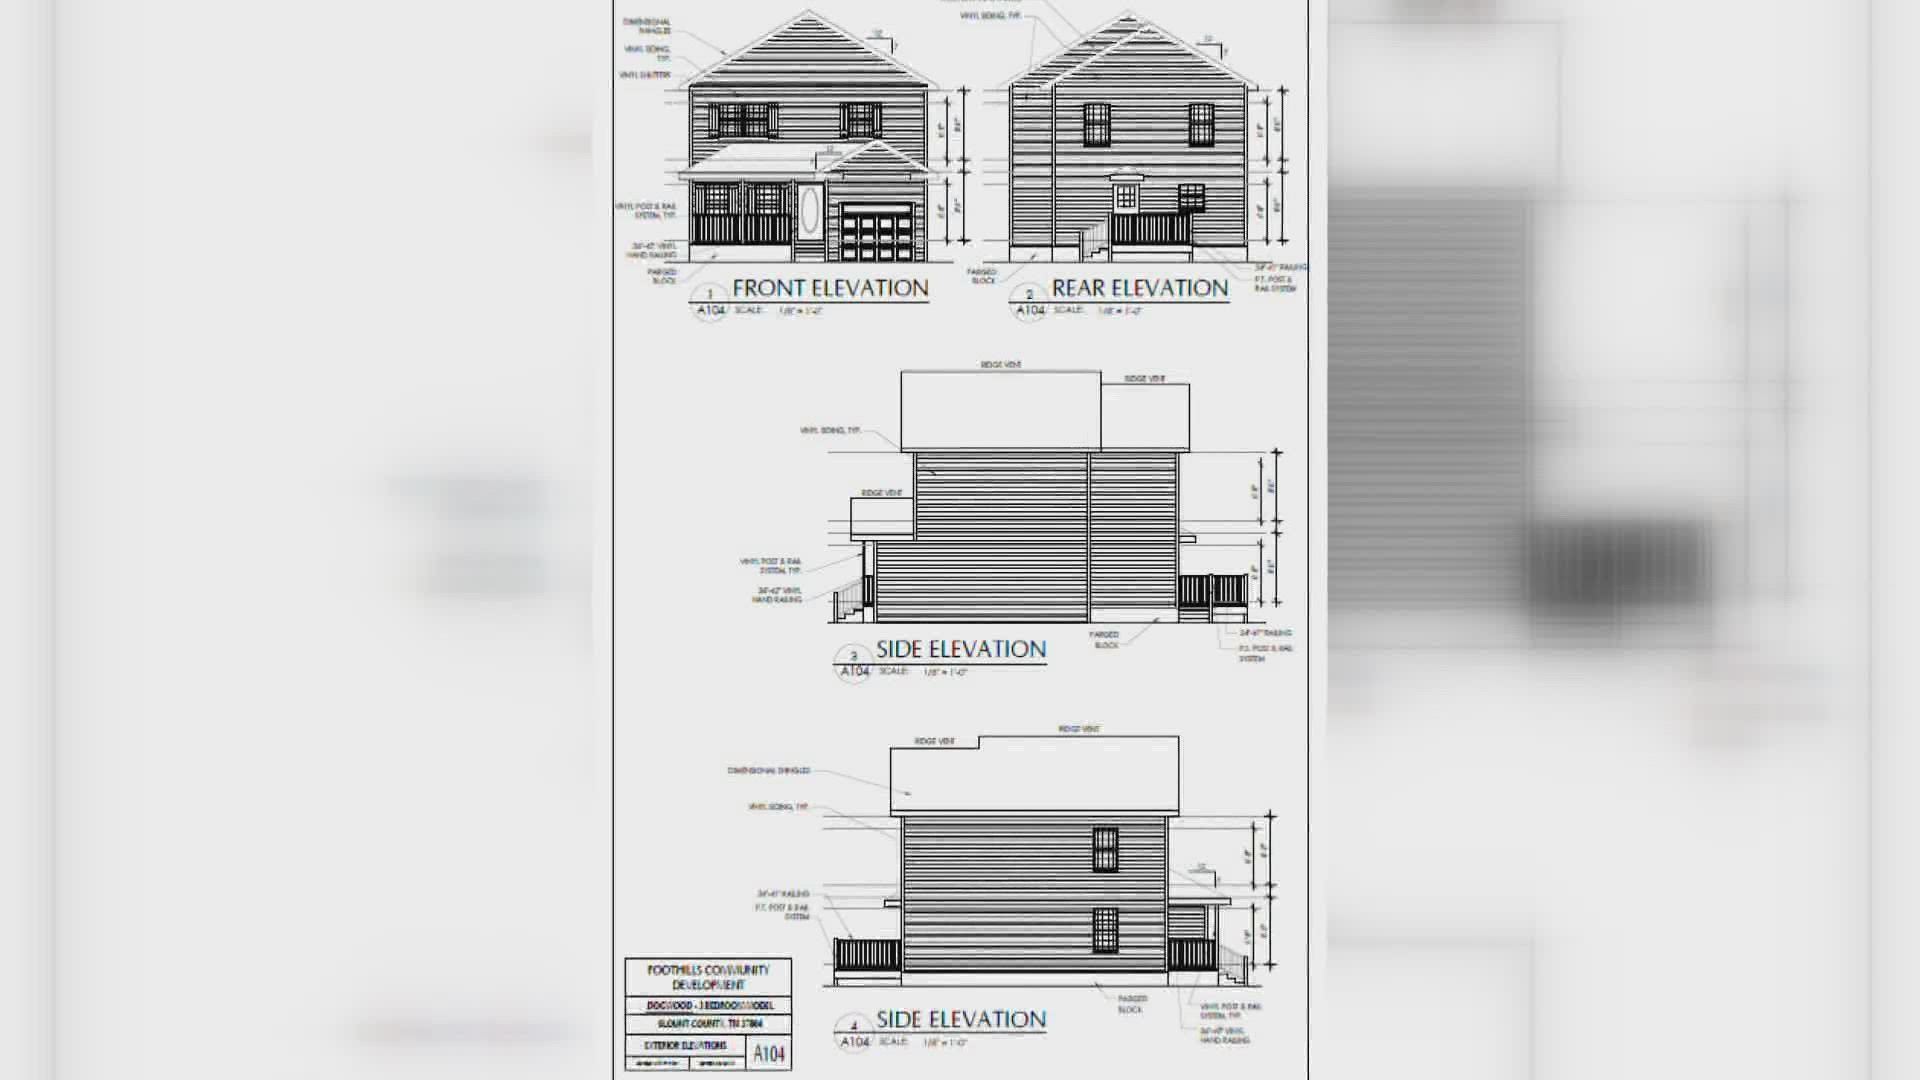 A non-profit is building affordable homes in Blount Co. It comes at a time when high prices are making it especially tough to think about buying a home.